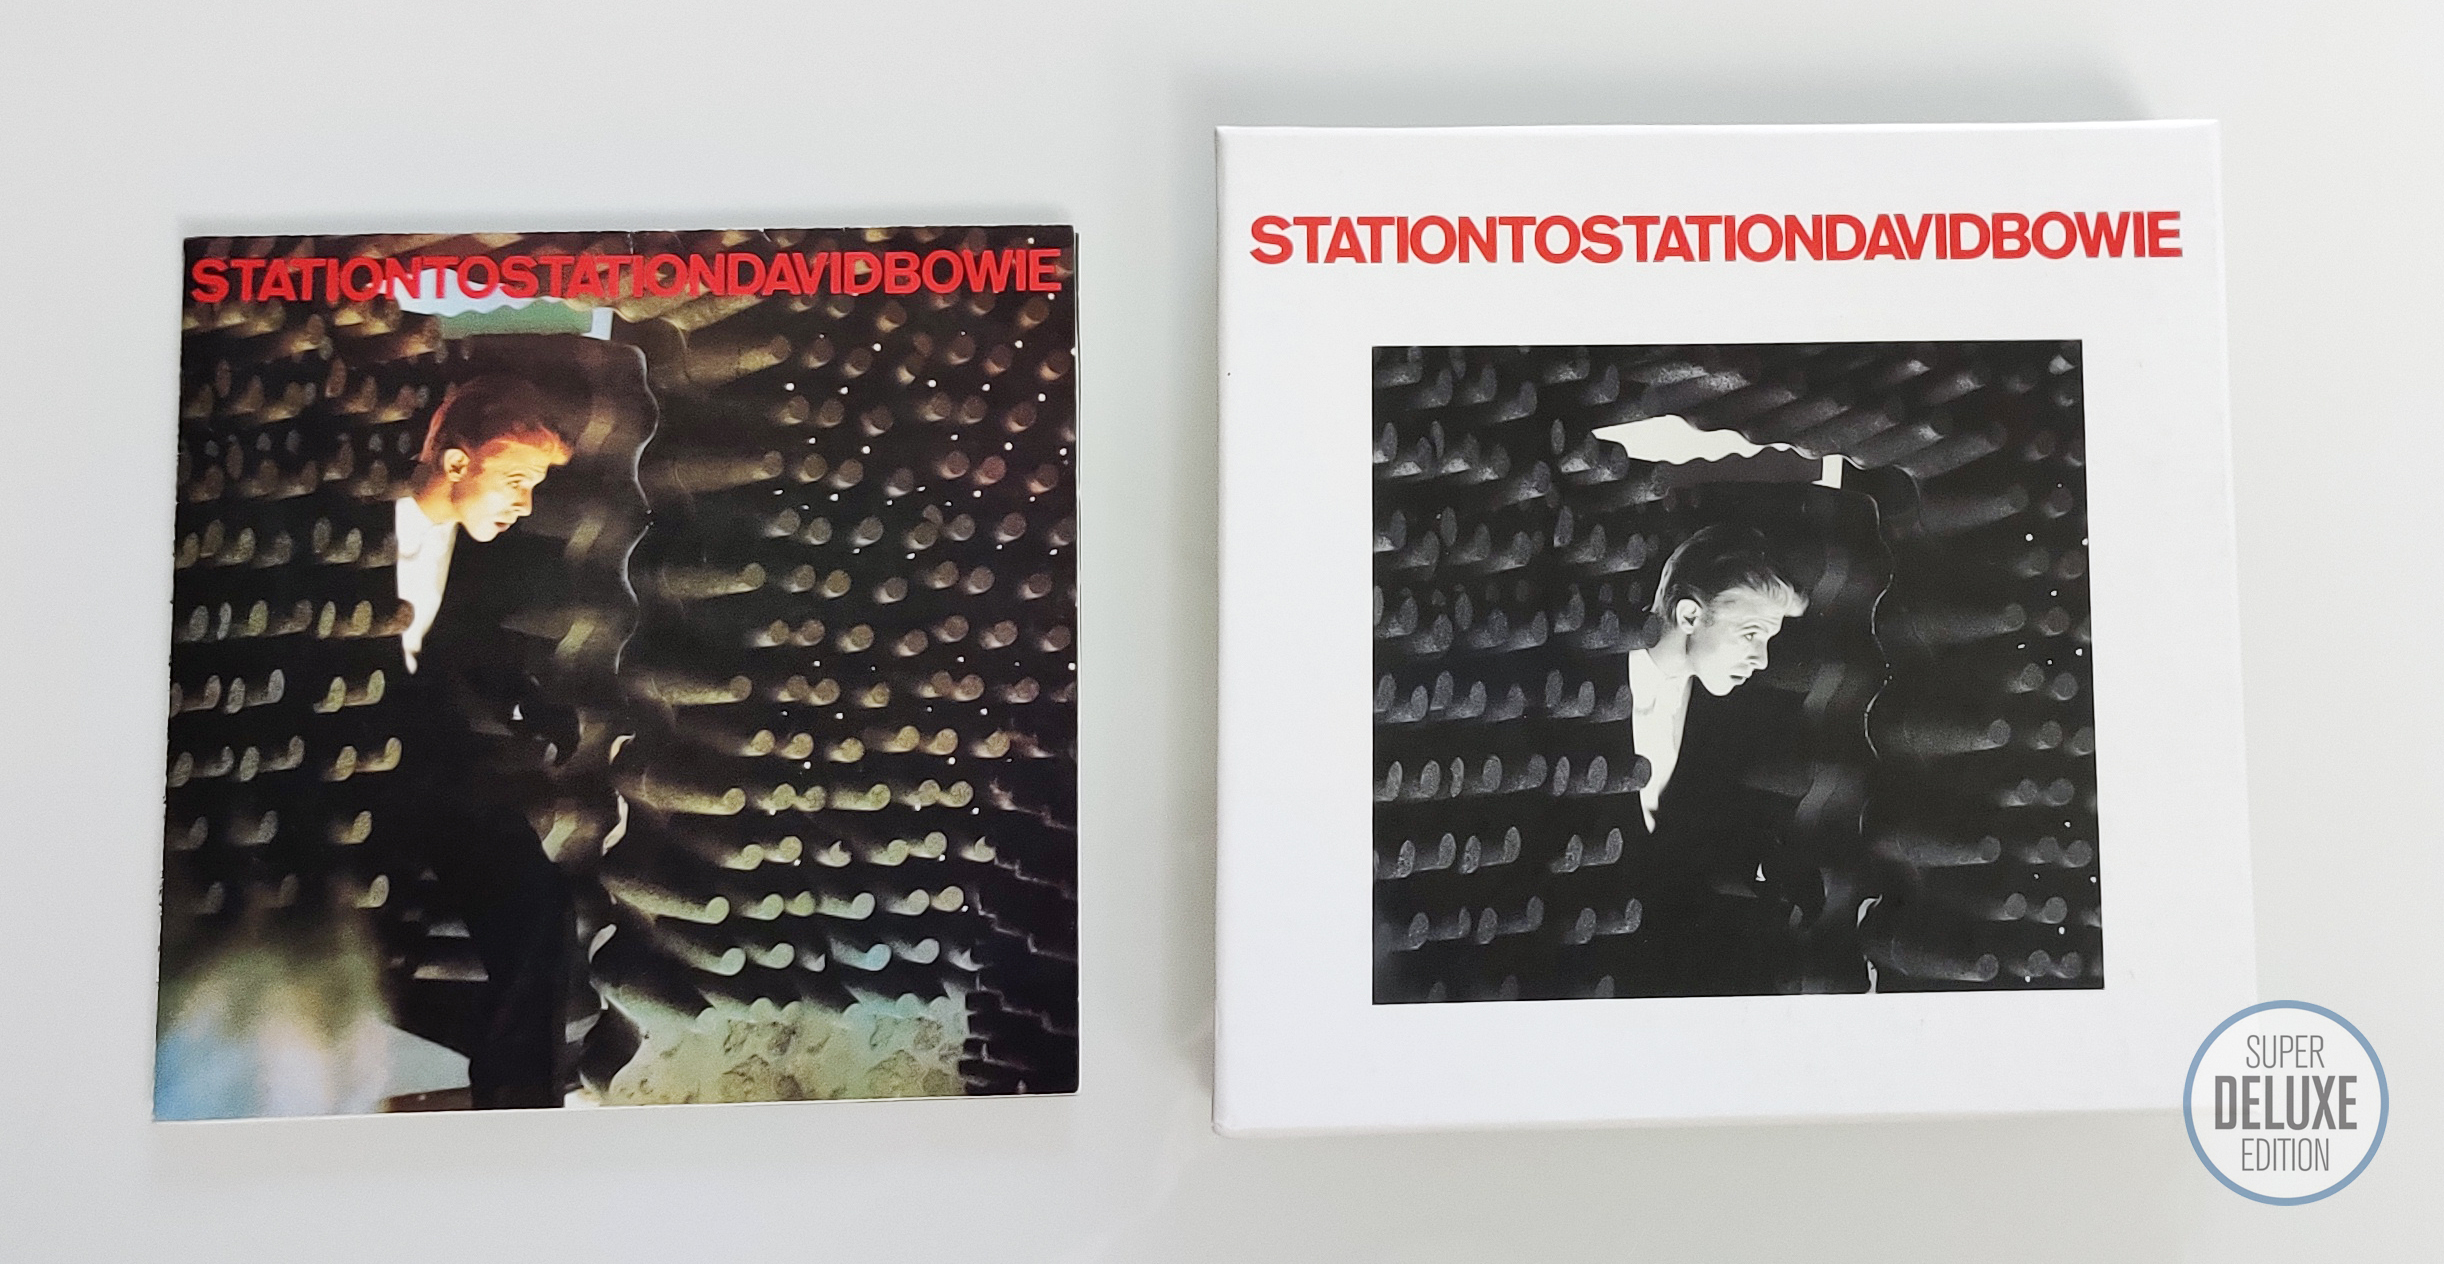 Coloured vinyl reissue of David Bowie's Station to Station for 